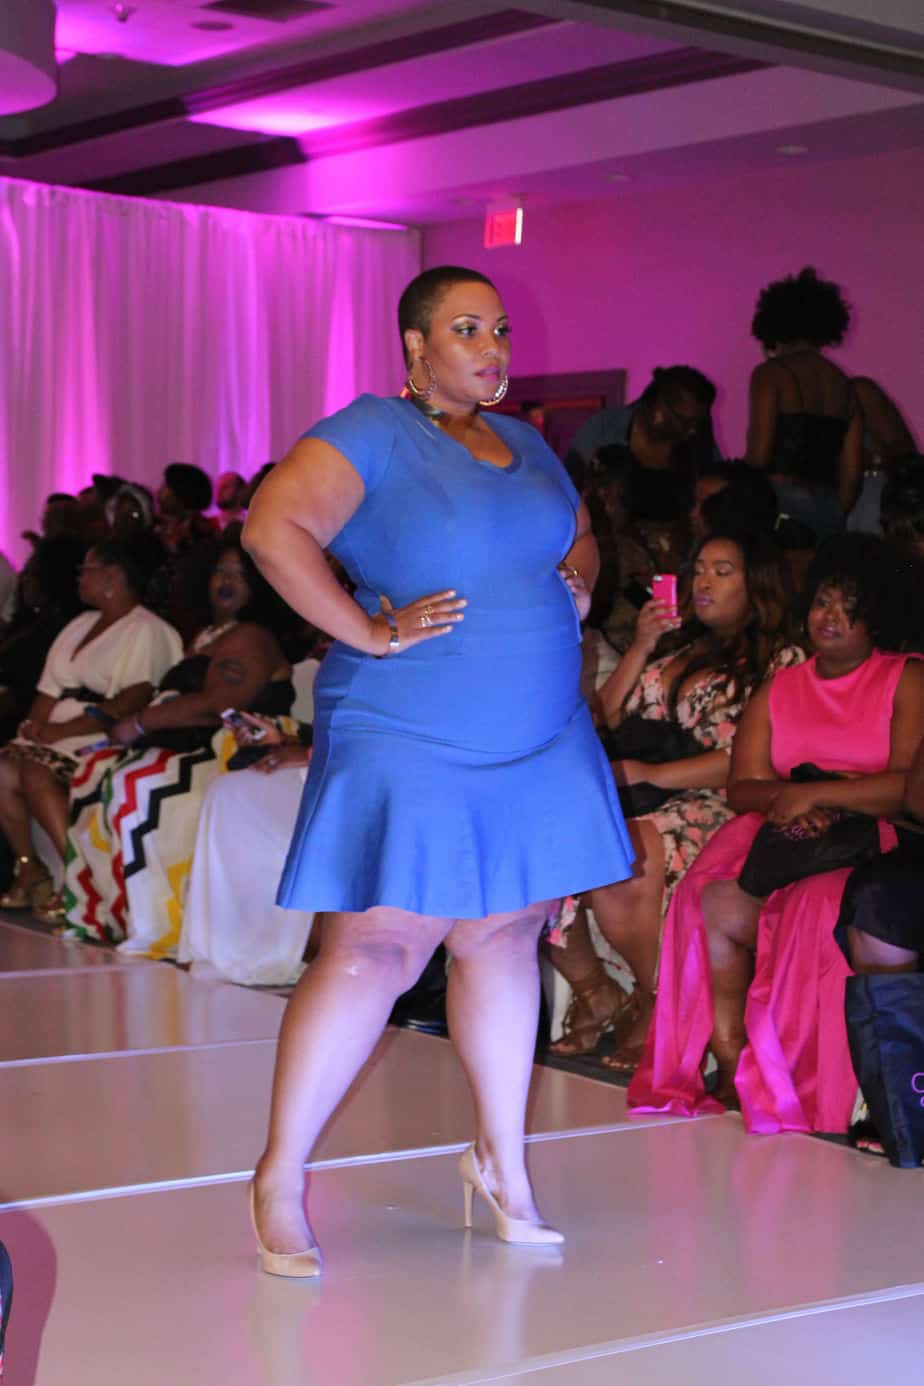 The Curvy Women Who Rock Brunch + Fave Looks from Curves Rock Weekend